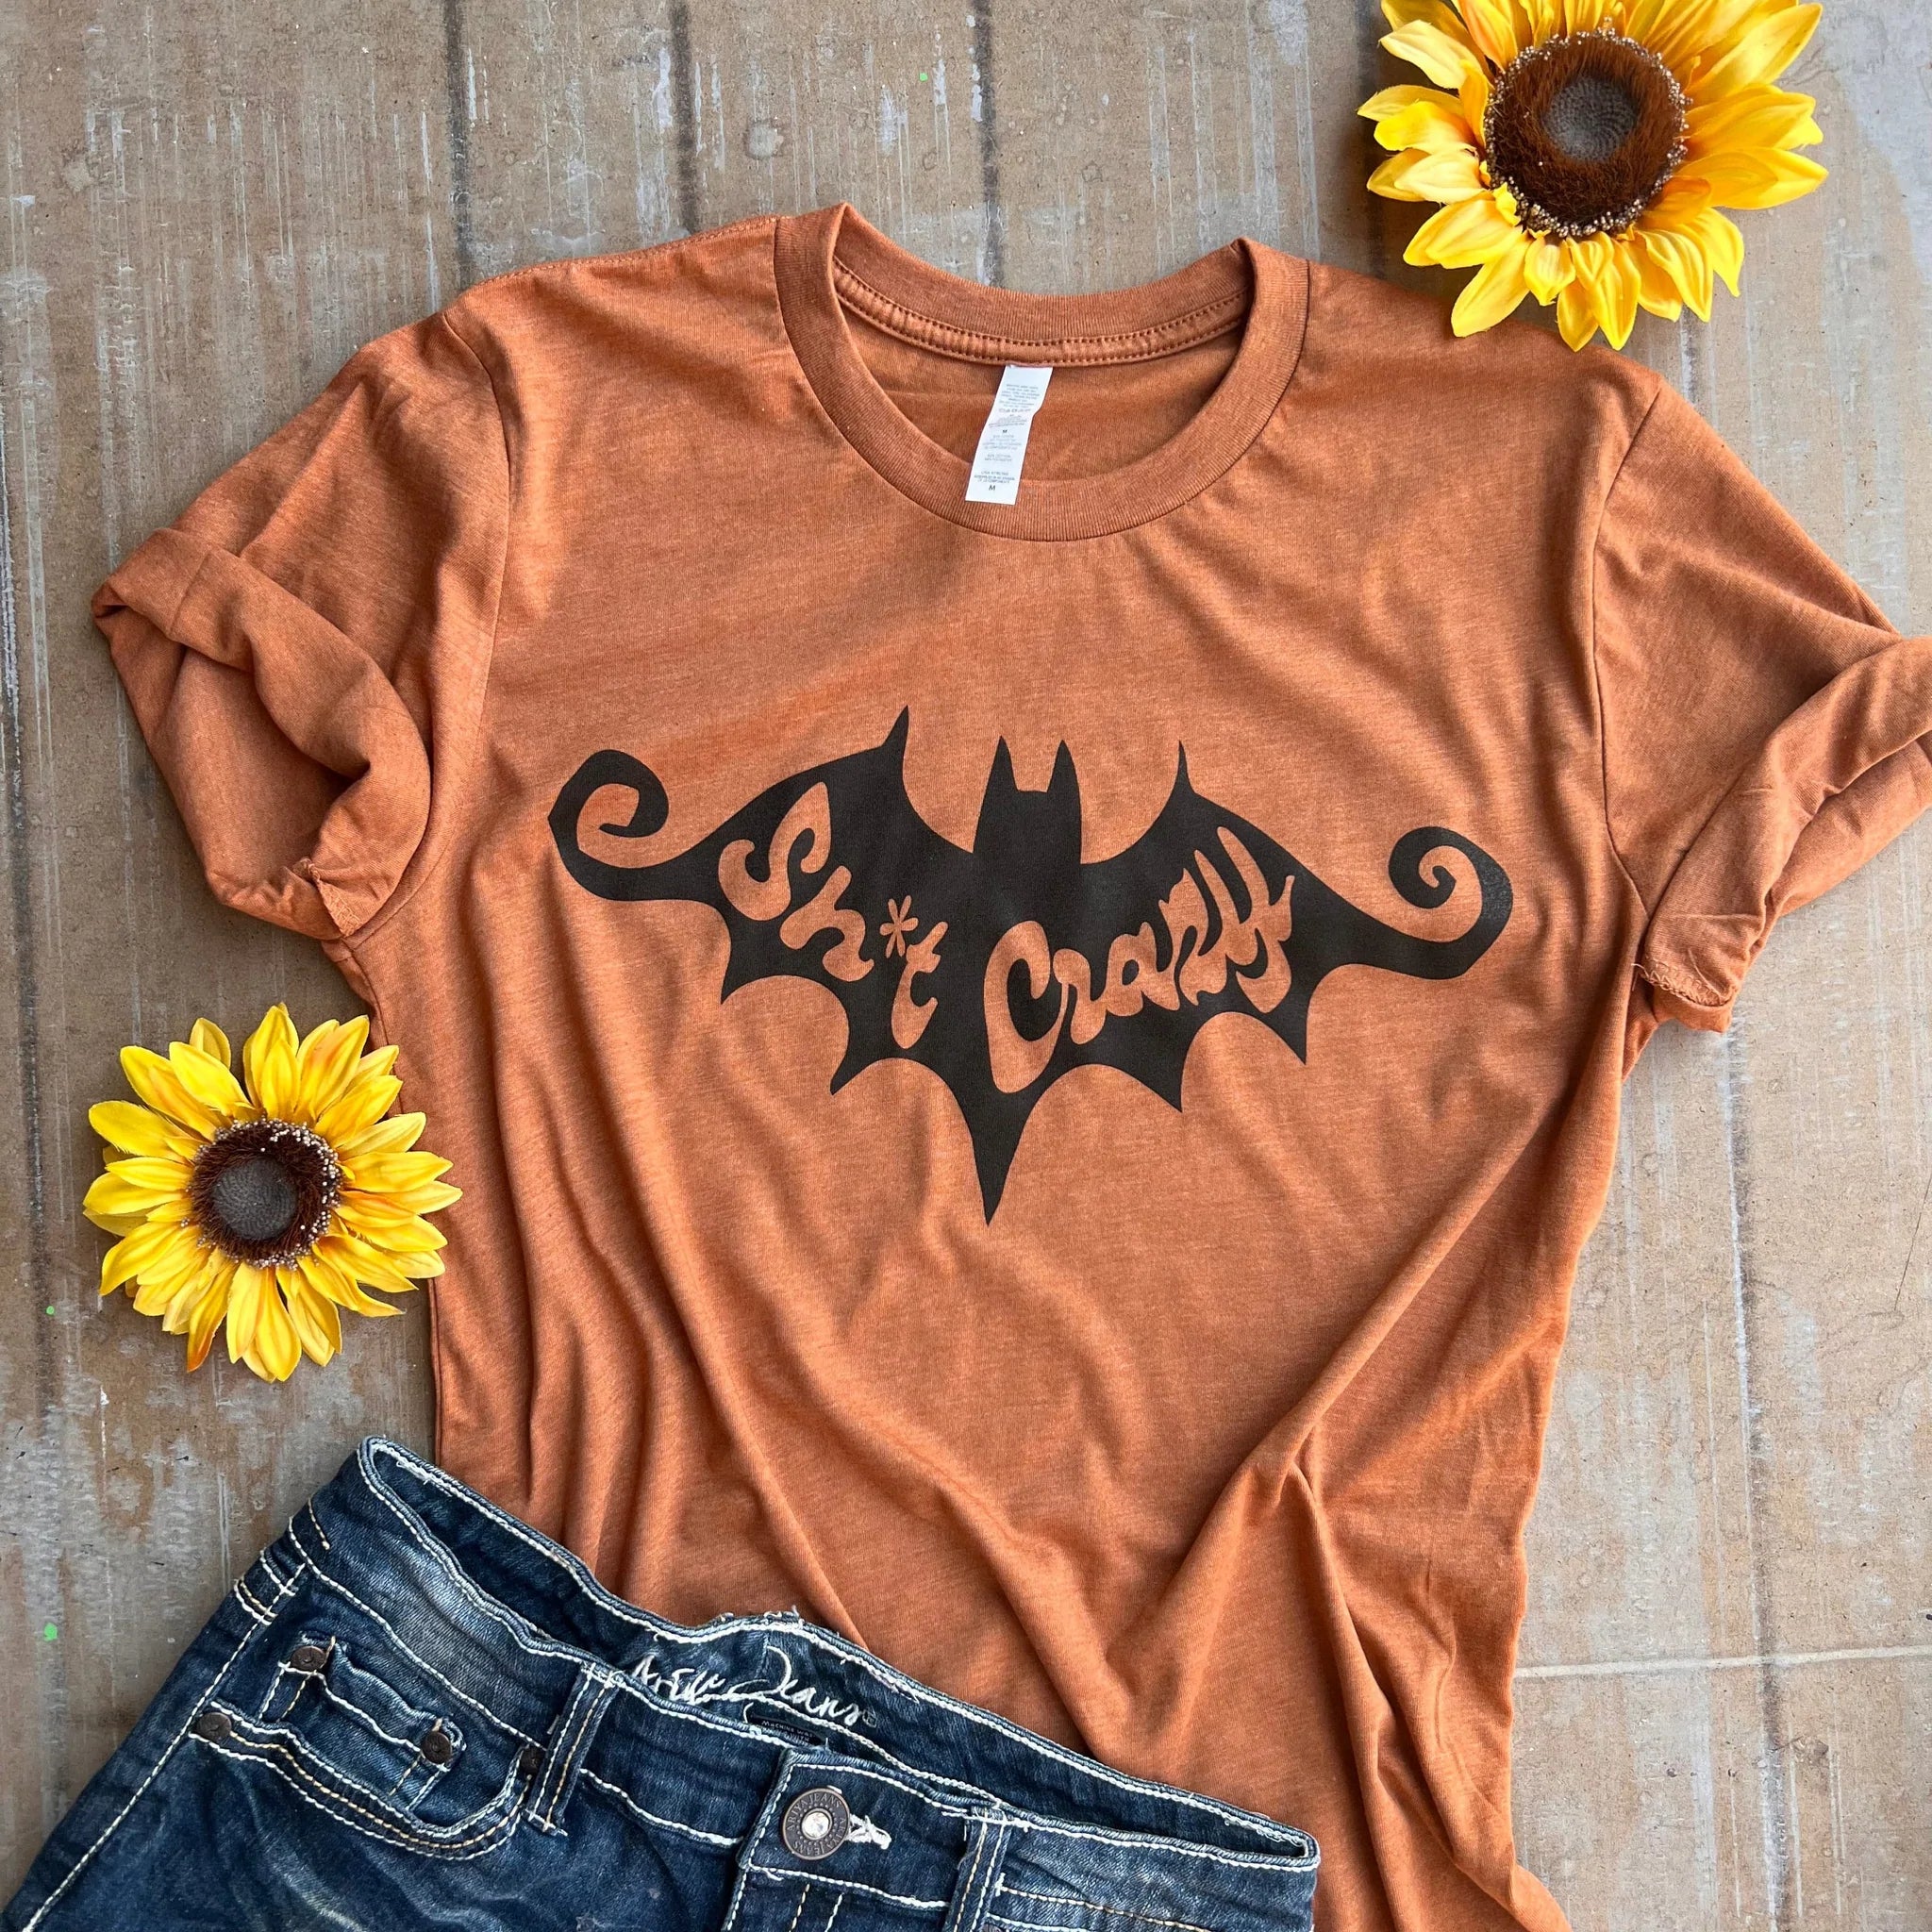 This is a short sleeve shirt in harvest orange with a bat with the words sh*t crazy in the middle of the bat. There are two sunflowers around the shirt with a pair of blue jeans at the bottom of the picture.